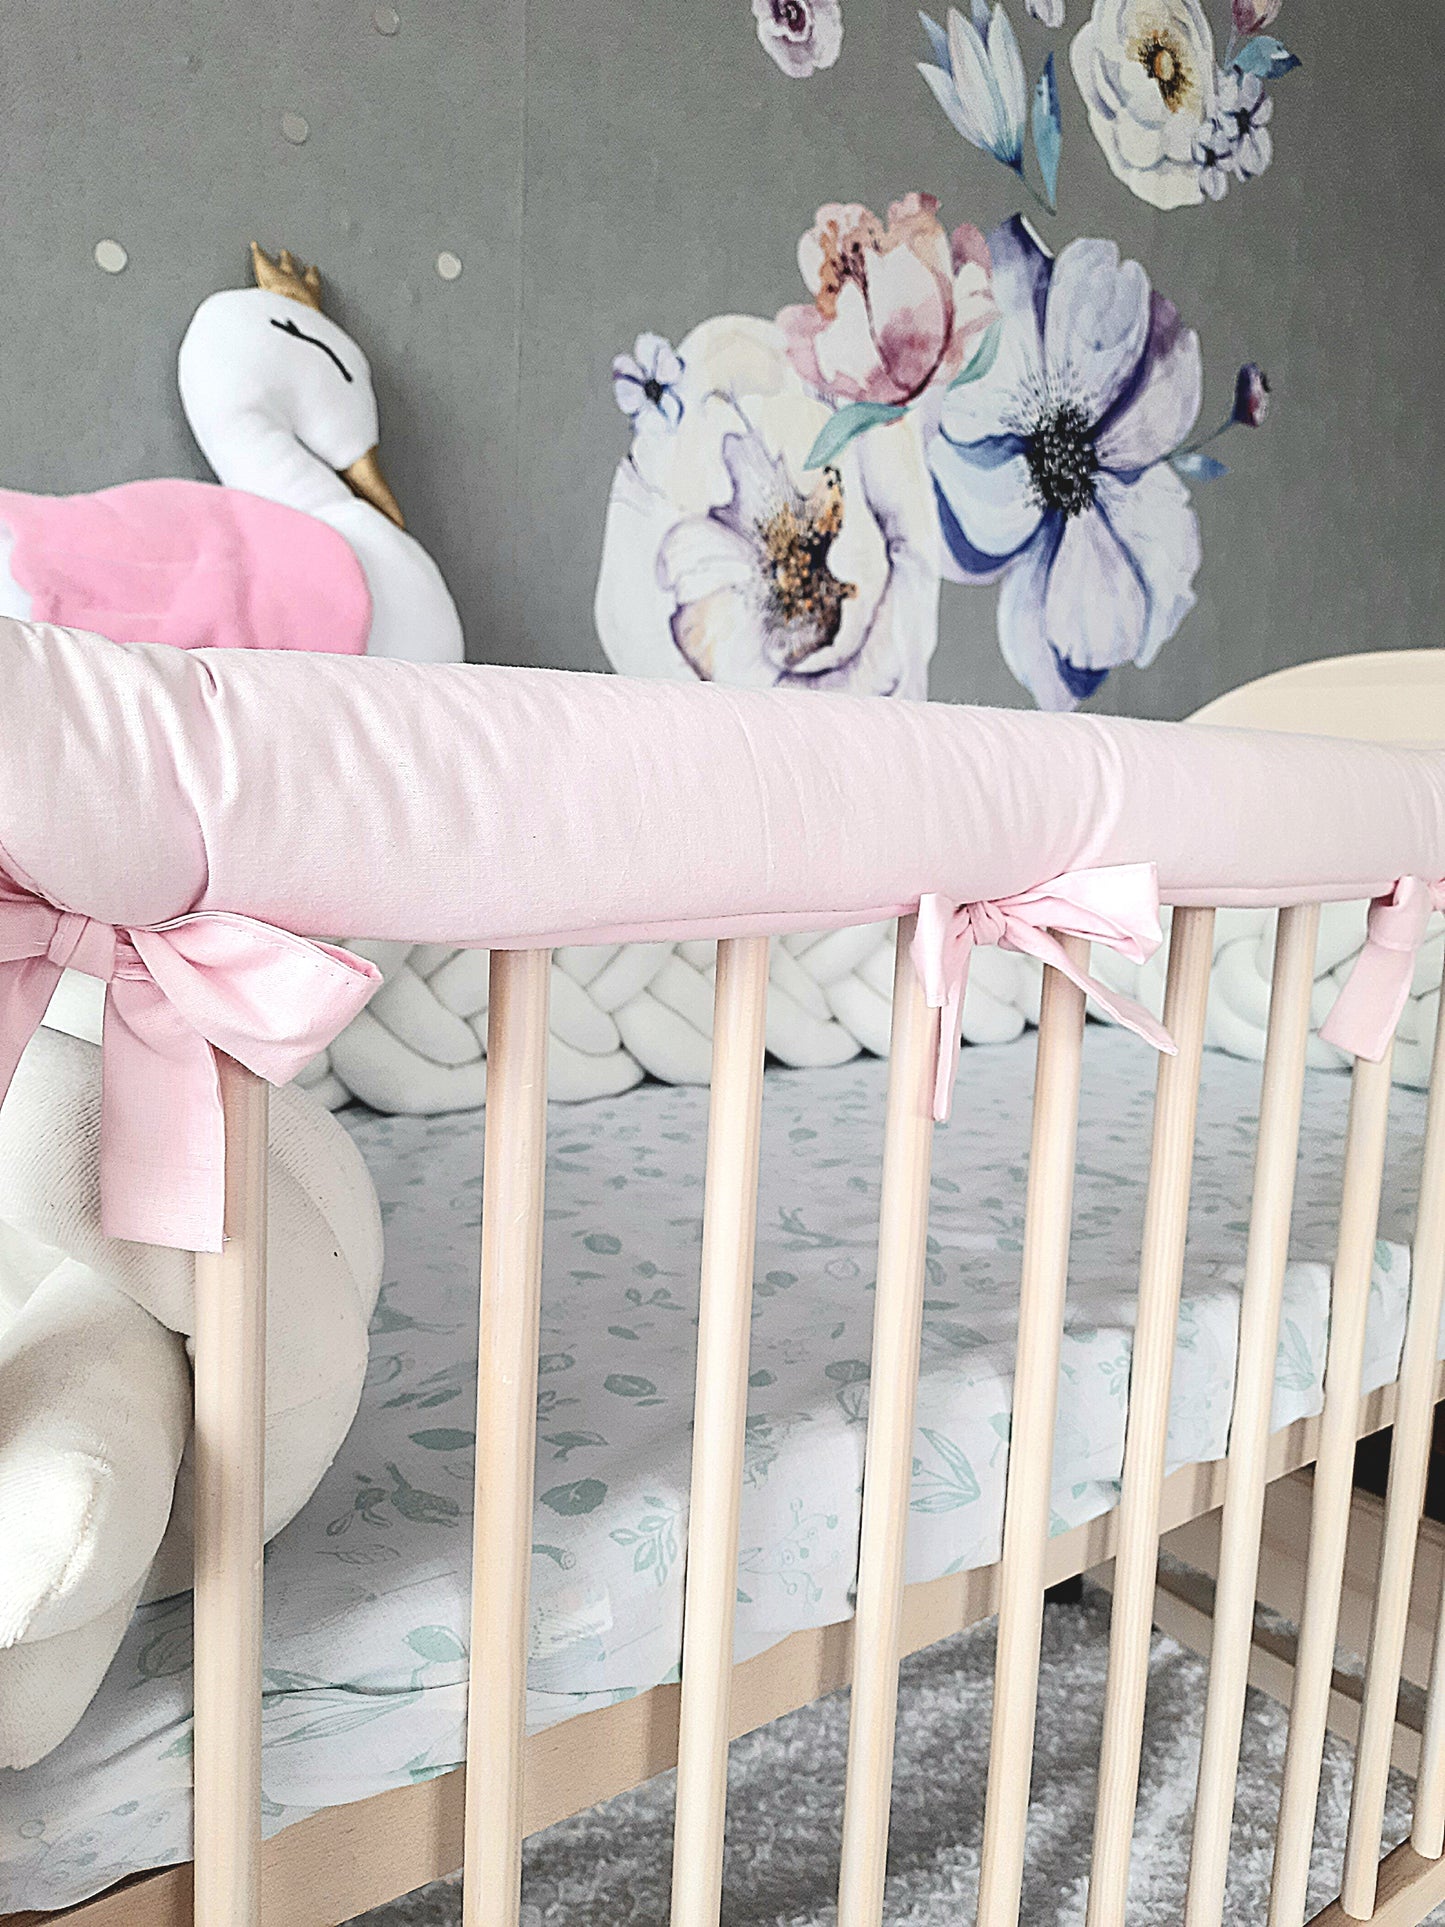 Cotton Rail Cover: Protect Your Baby's Crib in Style - Solid colors